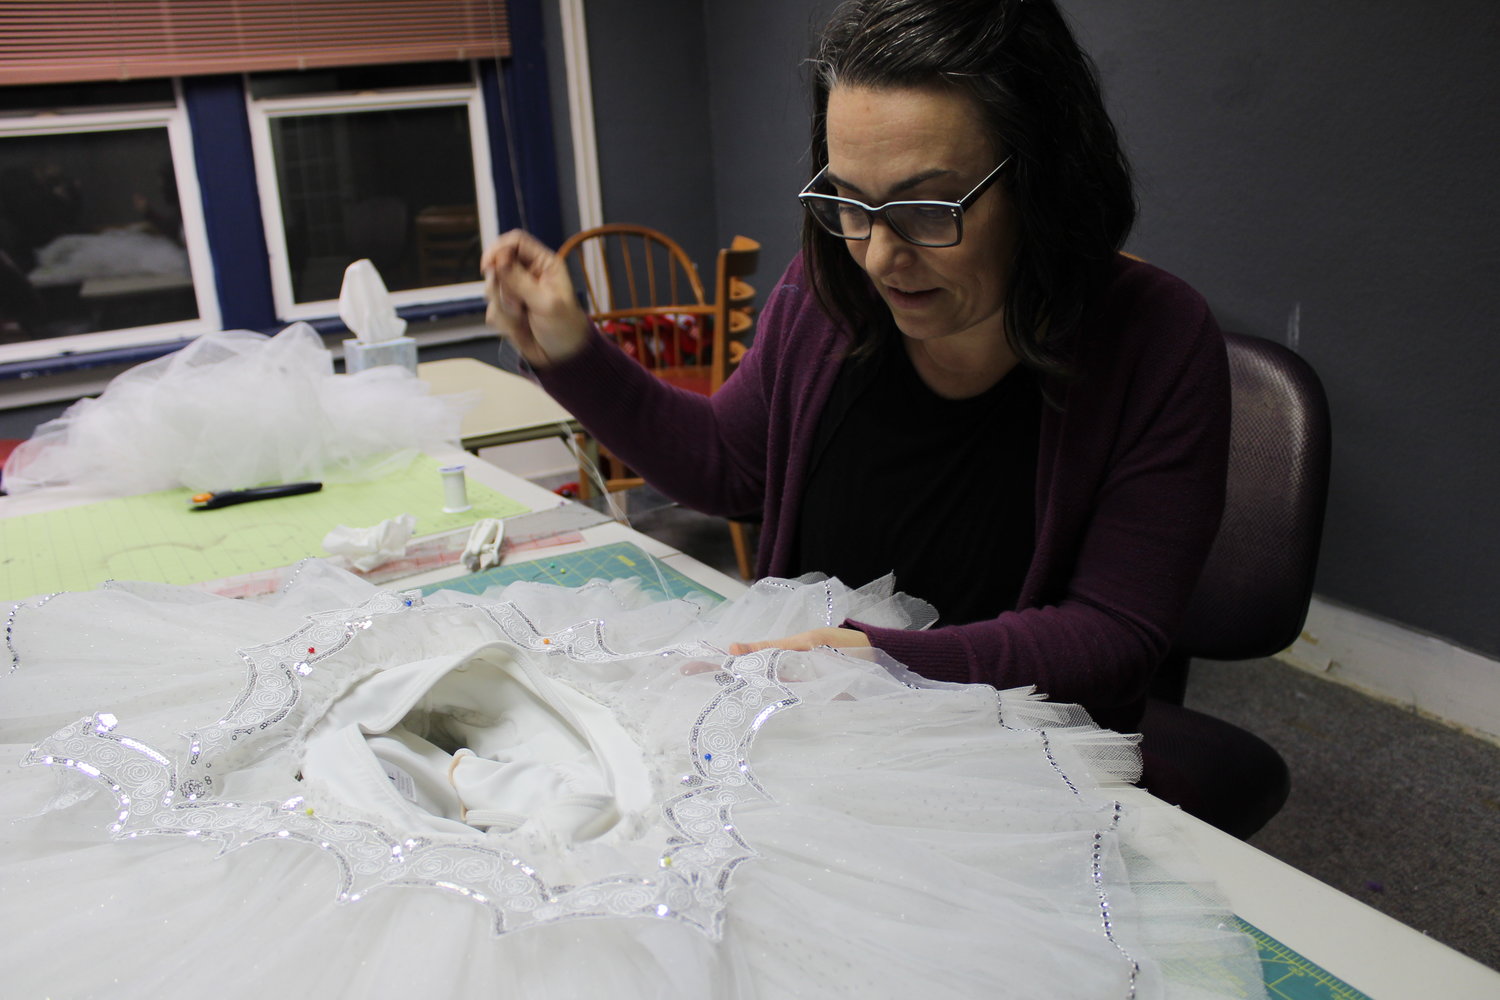 Tiffany James adds embellishments to a costume for Snow for "The Nutcracker” presented by Southwest Washington Ballet. For the 25th anniversary celebration, the Chehalis dance school has revived some vintage costumes and set pieces to pay homage to the performance's history.